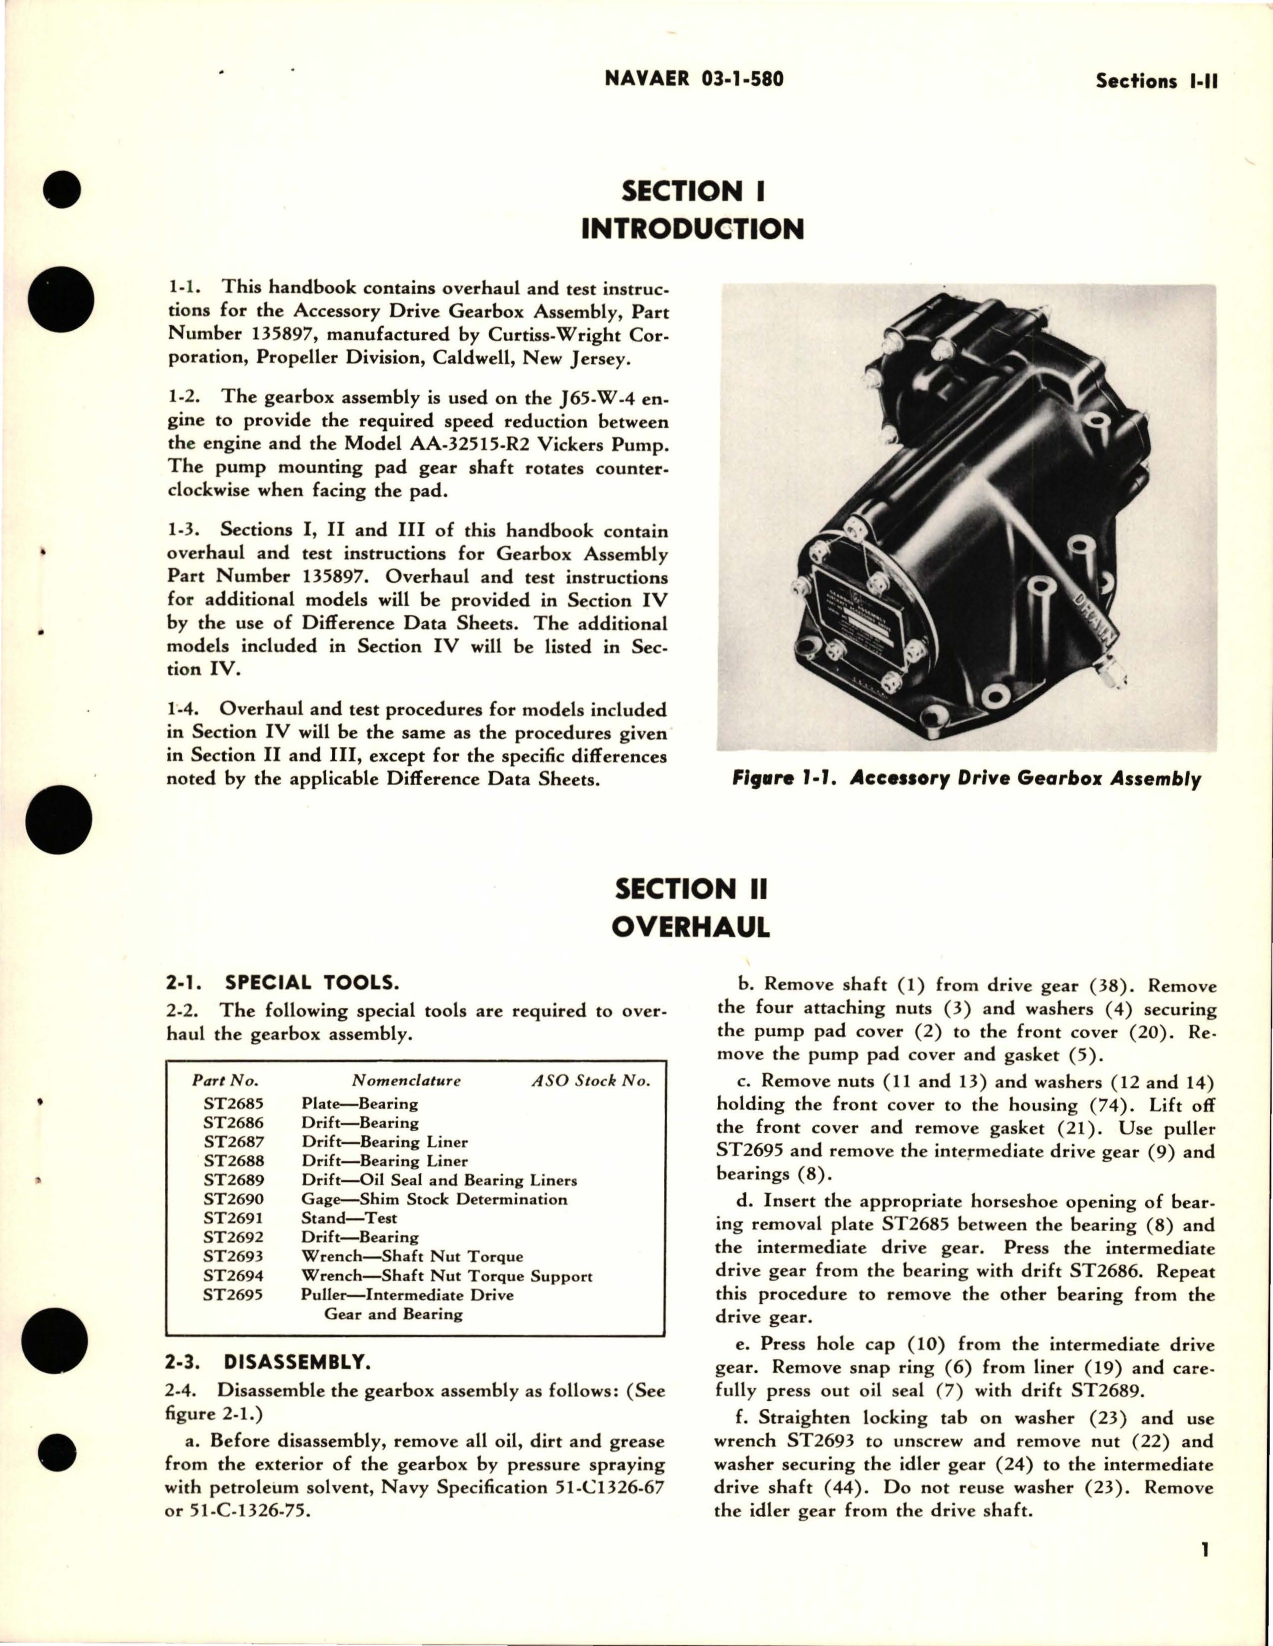 Sample page 5 from AirCorps Library document: Overhaul Instructions for Accessory Drive Gearbox Assembly - Part 135897 